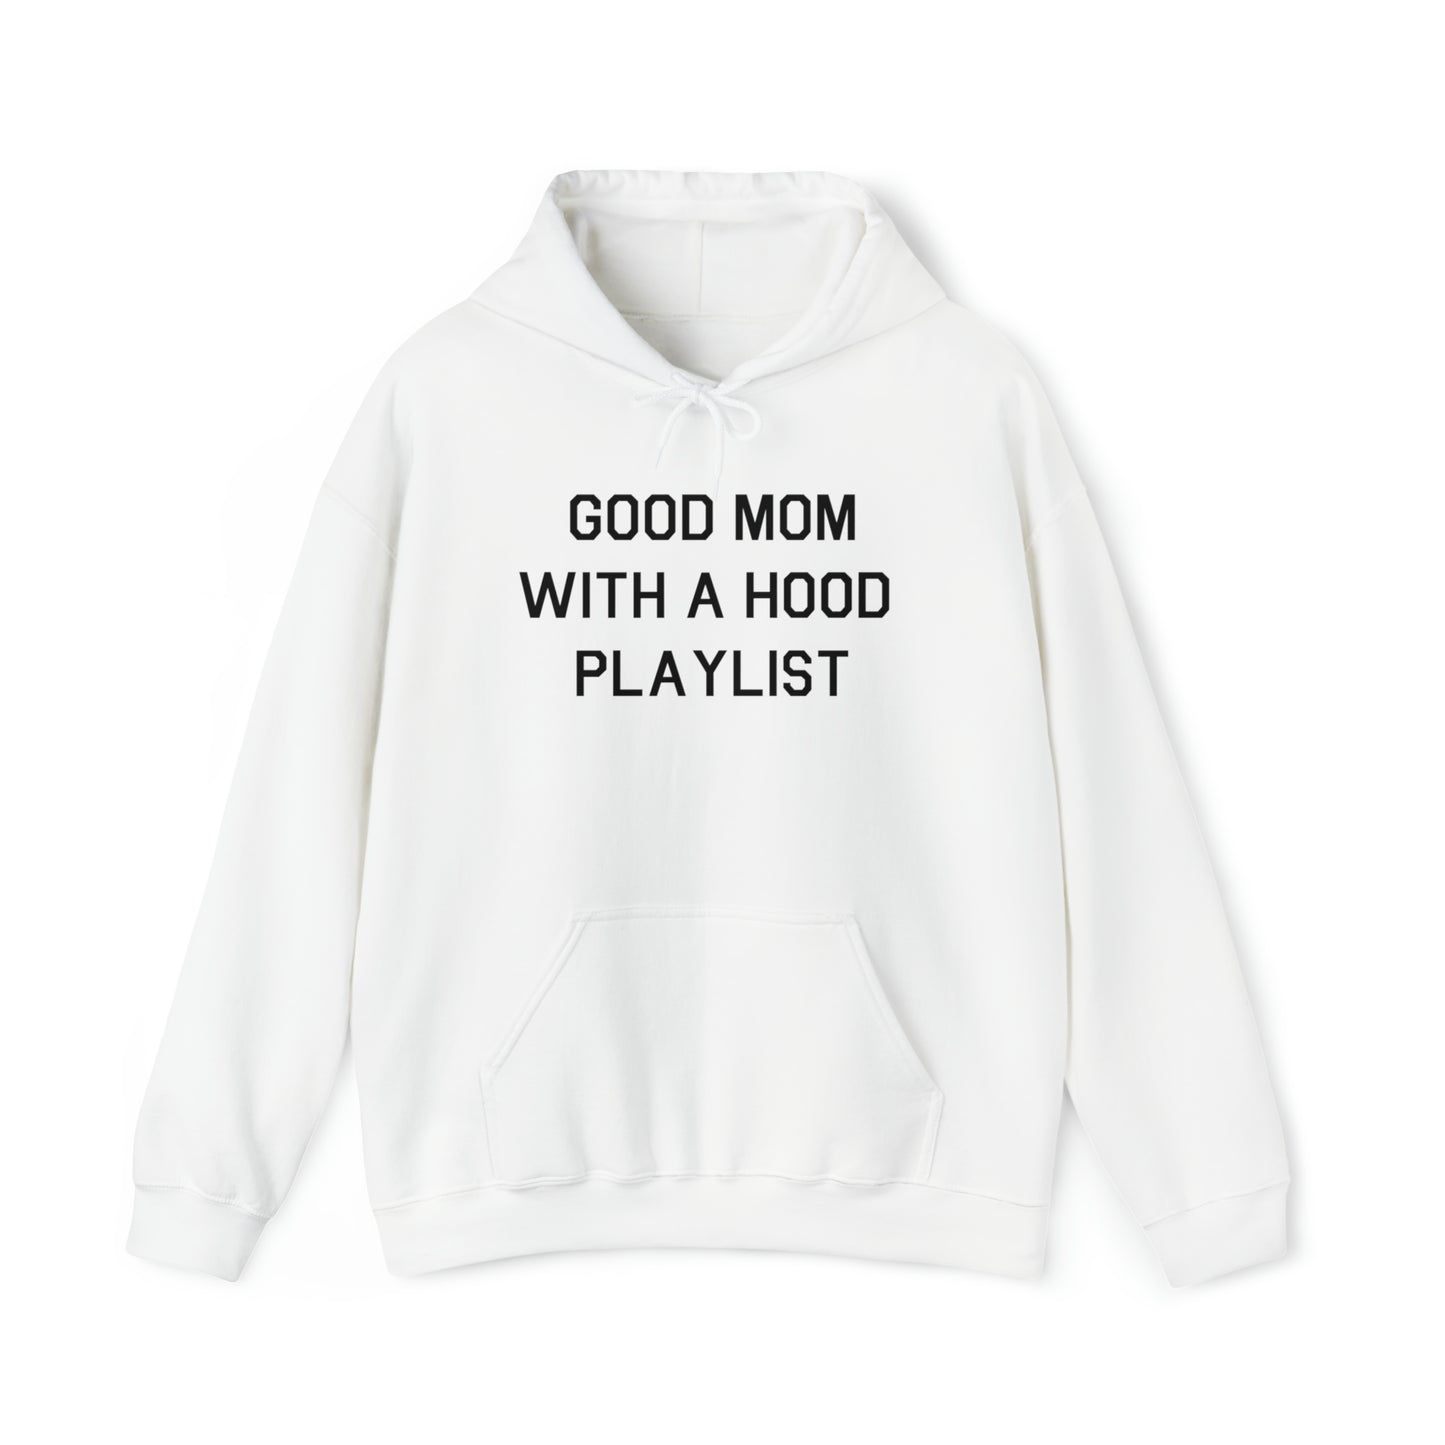 Good Mom With a Hood Playlist Hoodie Great Gift for a Good Mom With a Hood Playlist Sweatshirt